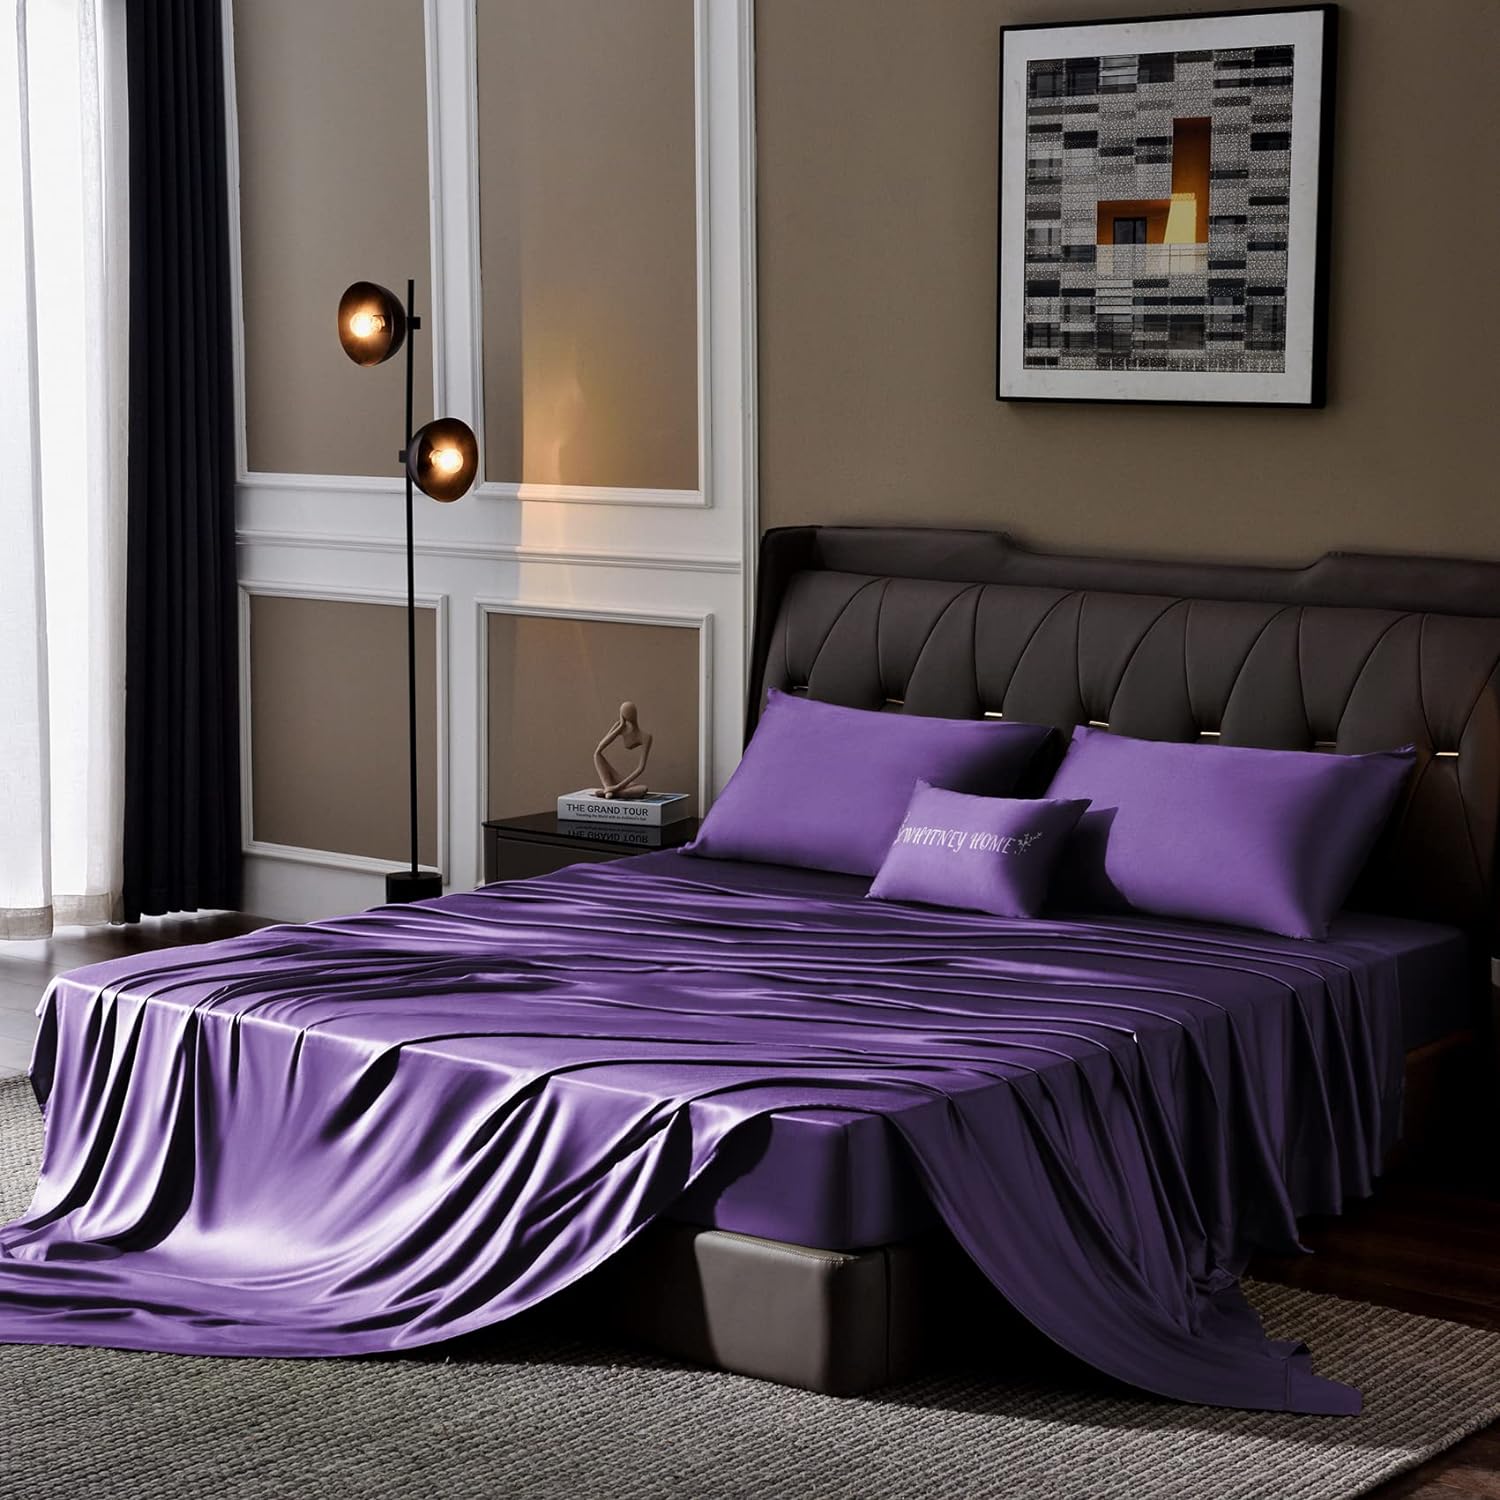 Queen Size Sheet Set 4 Piece Purple Bamboo Bed Sheets Soft Cooling Sheets for Hot Sleepers Fitted Sheet 16 Deep Pocket Best Luxury Hotel Collection Washed Wrinkle Free Breathable Flat Sheet